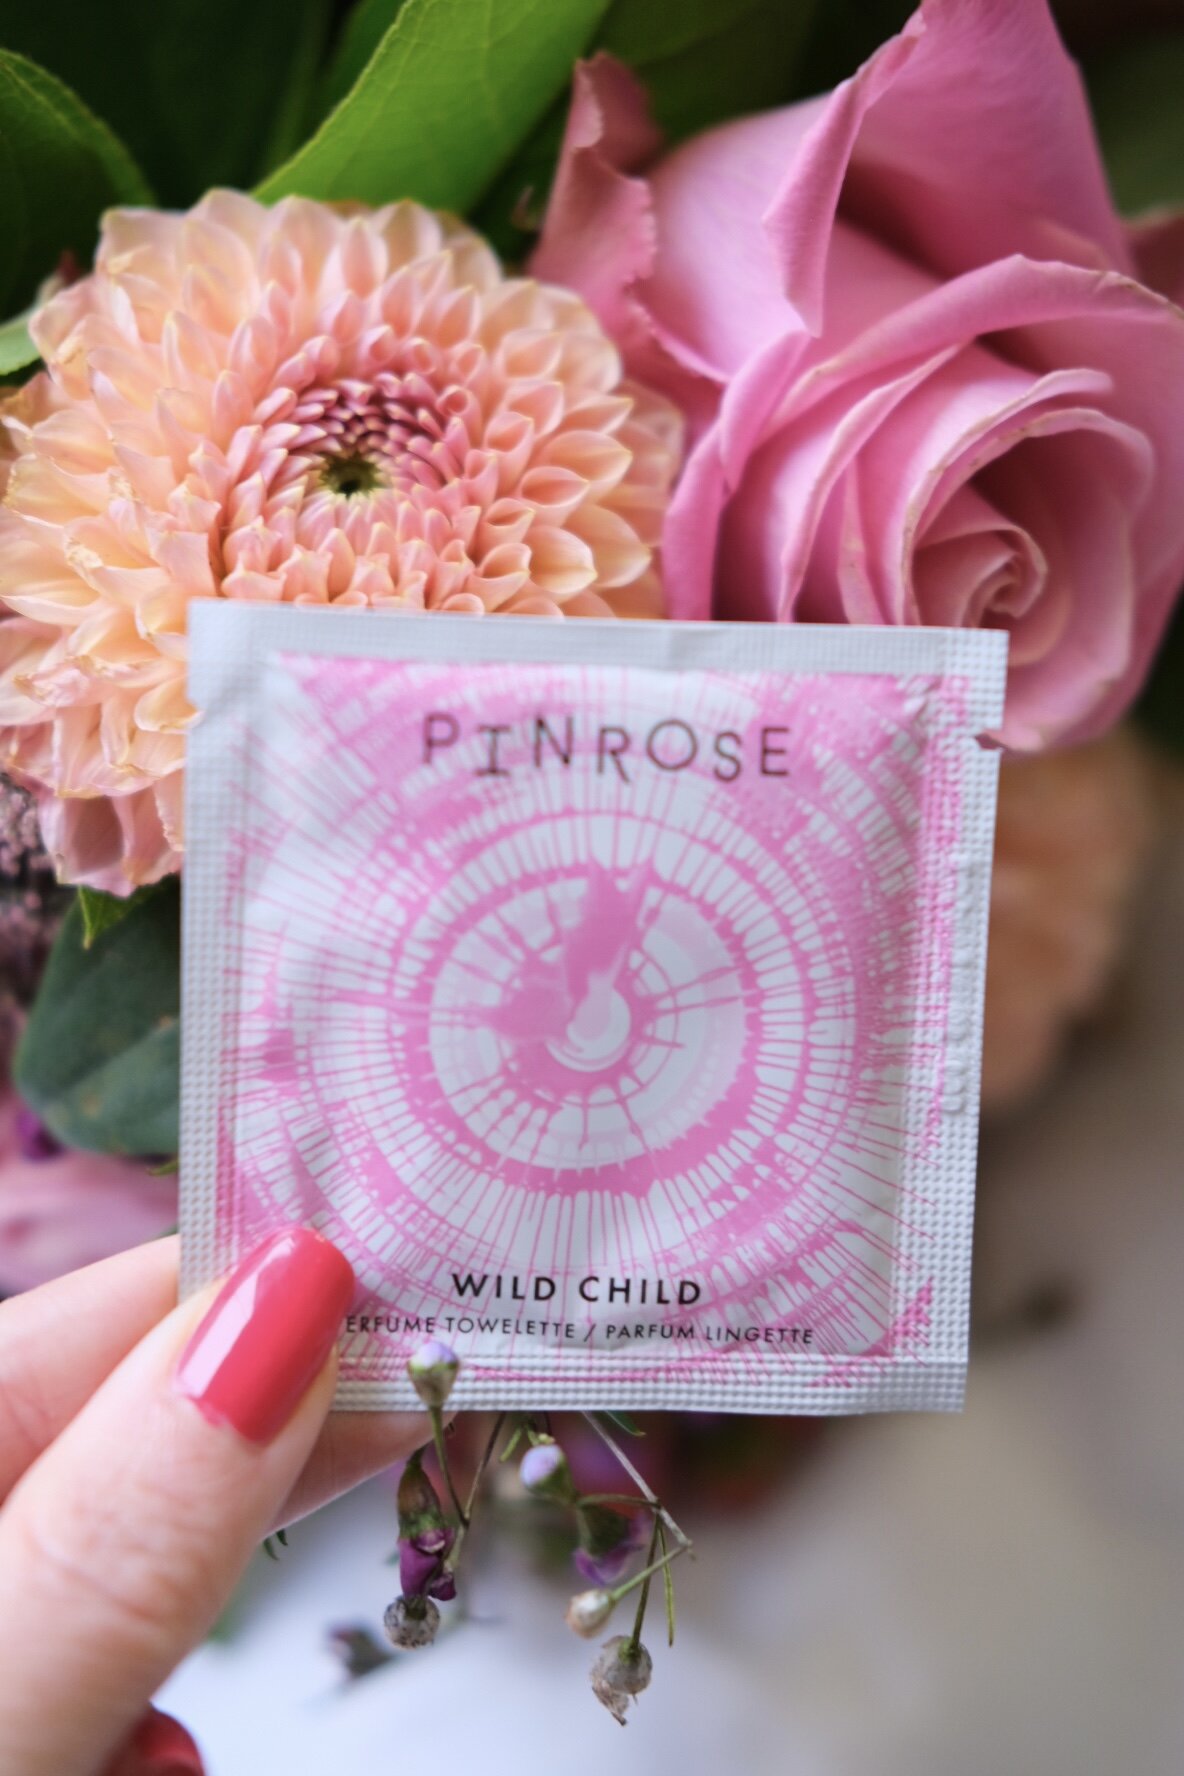 Pinrose Review - Pinrose Petal Starter Kit 2020 Review. Coupon code and everything you need to know about Pinrose Petal Starter Kit including my thoughts on the Pinrose Scent Profile Quiz. Coupon code for 20% off included. My 2020 Pinrose Petal Star…